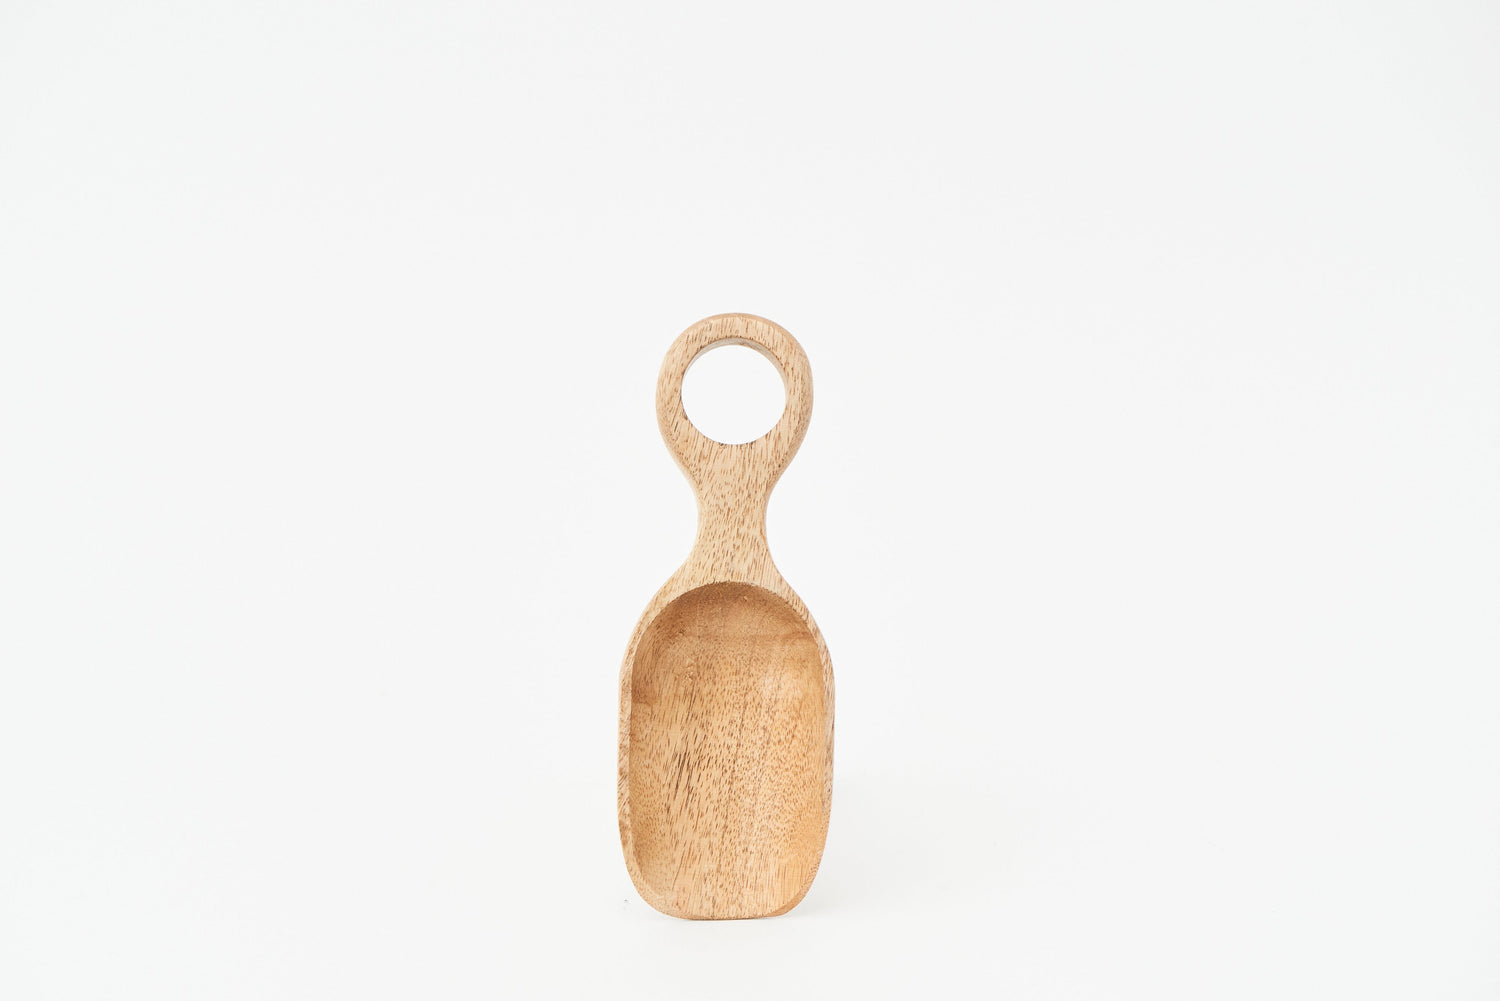 Pullen and Co Willoughby Wooden Scoop (7217496162475)